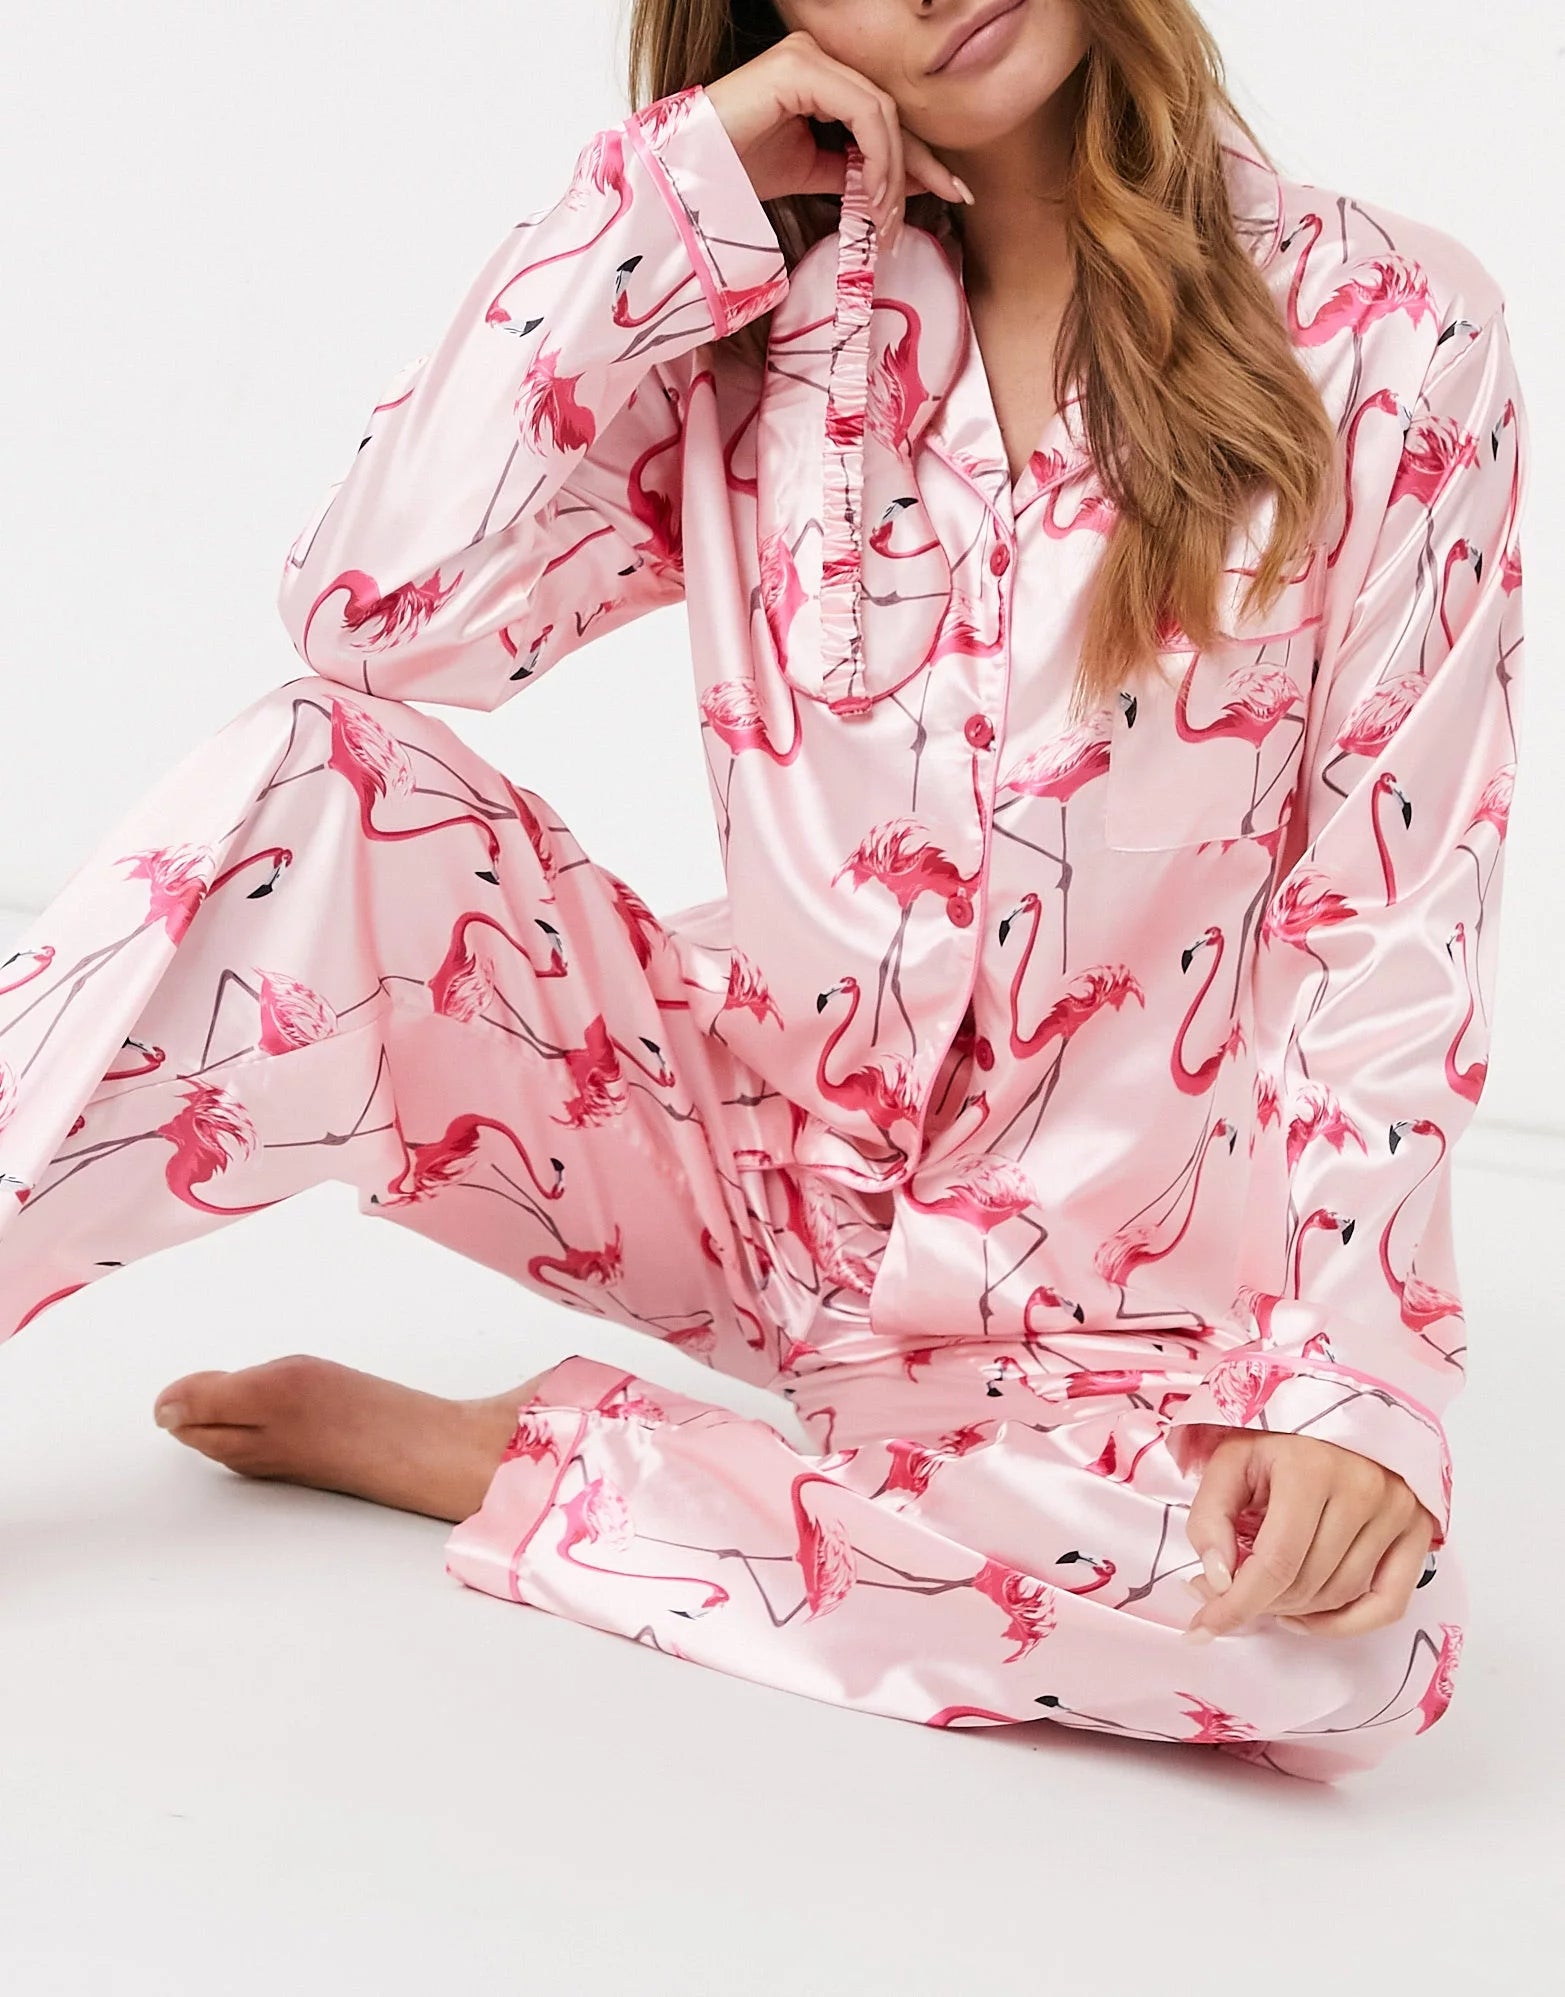 Pink Color Digital Abstract Printed loungewear/Nightsuit For Women With Pants.